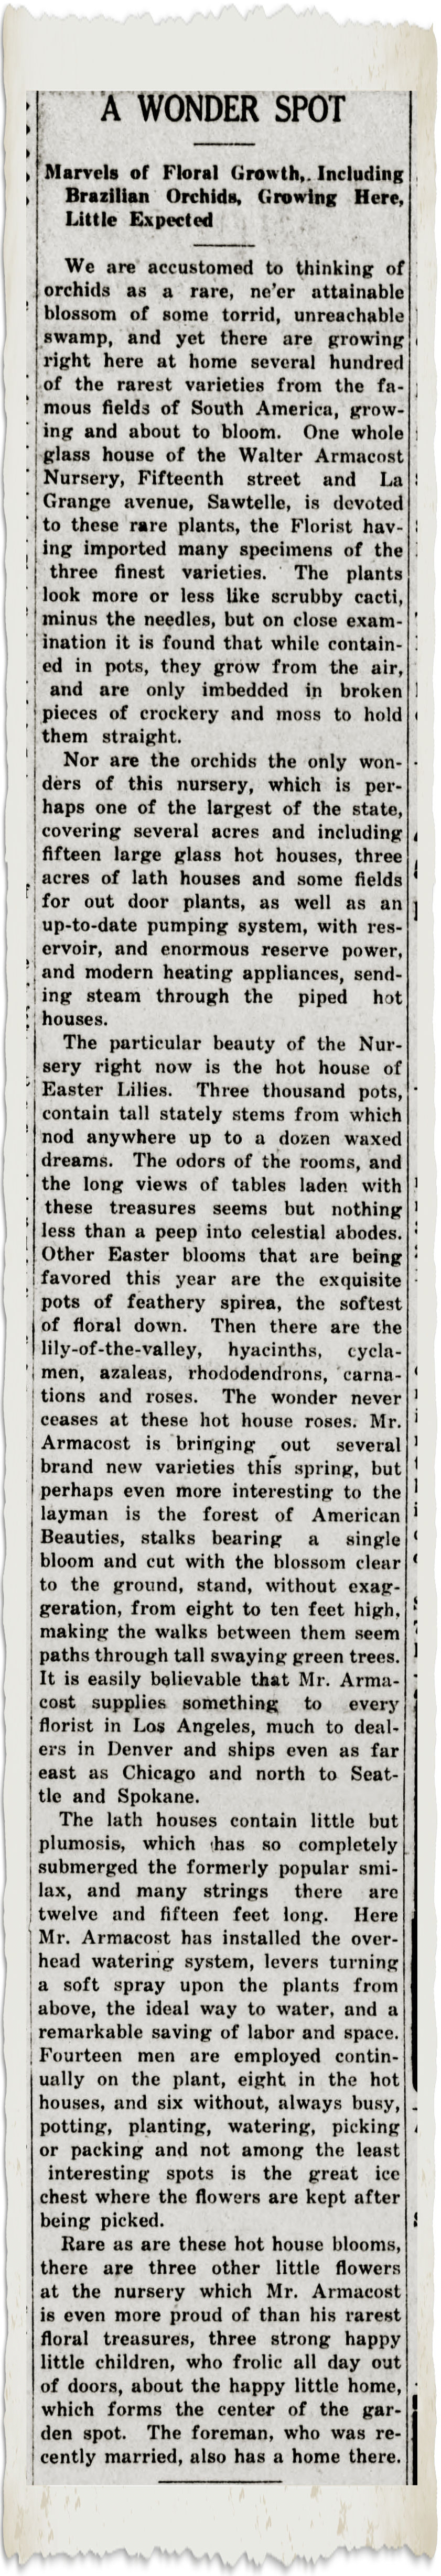 The Daily Outlook, April 01, 1914 armacost crop